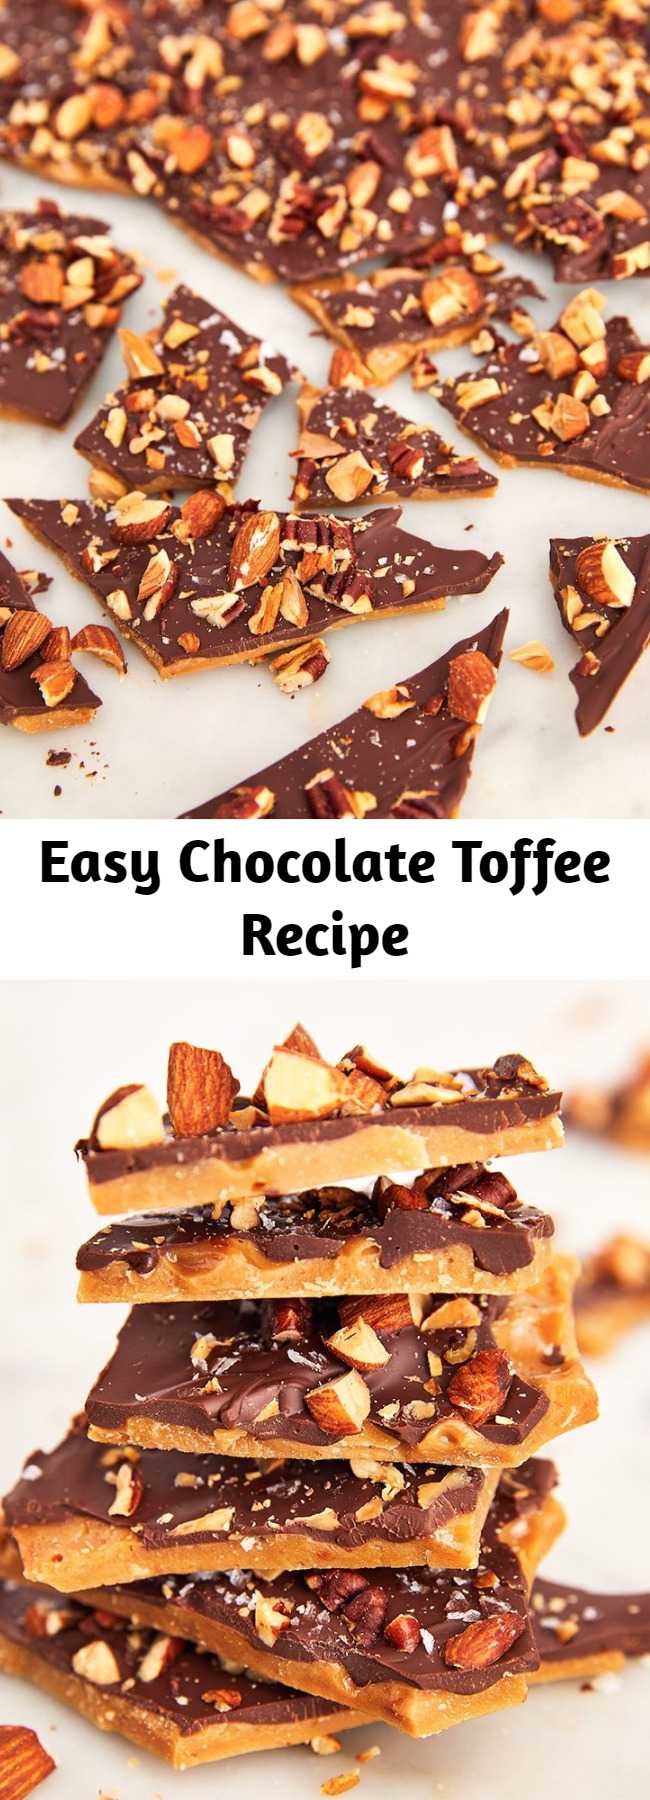 Easy Chocolate Toffee Recipe - Need a gift for friends, coworkers, and the babysitter? Chocolate toffee to the rescue. This recipe is really simple, but toffee in general can be a littttlllleee fussy. Our biggest piece of advice: WHISK CONSTANTLY! The moment you walk away from the saucepan, the butter and sugar will separate. #easy #recipe #fromscratch #toffee #chocolate #christmas #holidays #gift #homemade #nuts #almonds #pecans #bark #bars